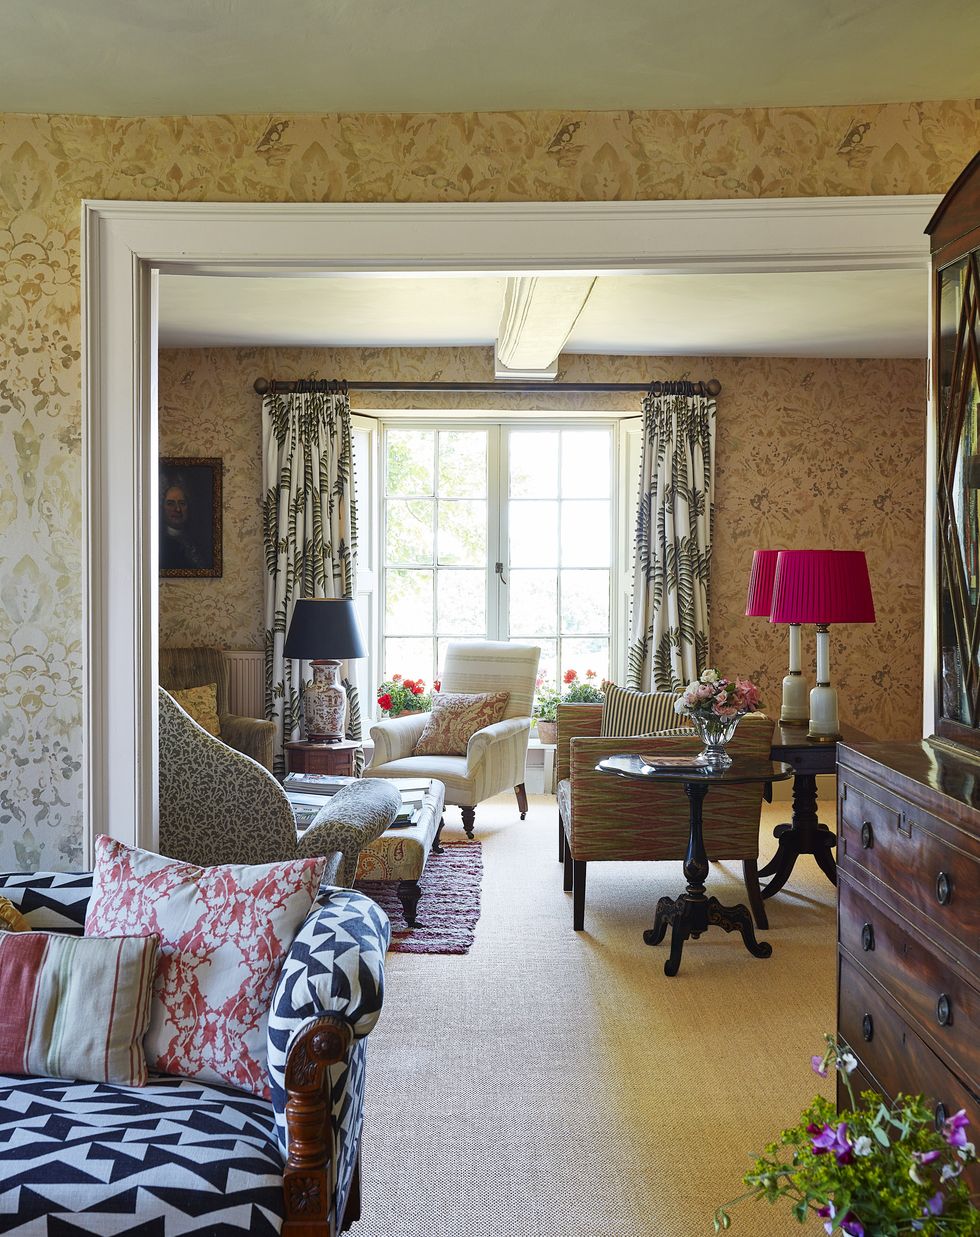 two separate rooms are connected by using the same wall covering and fabrics